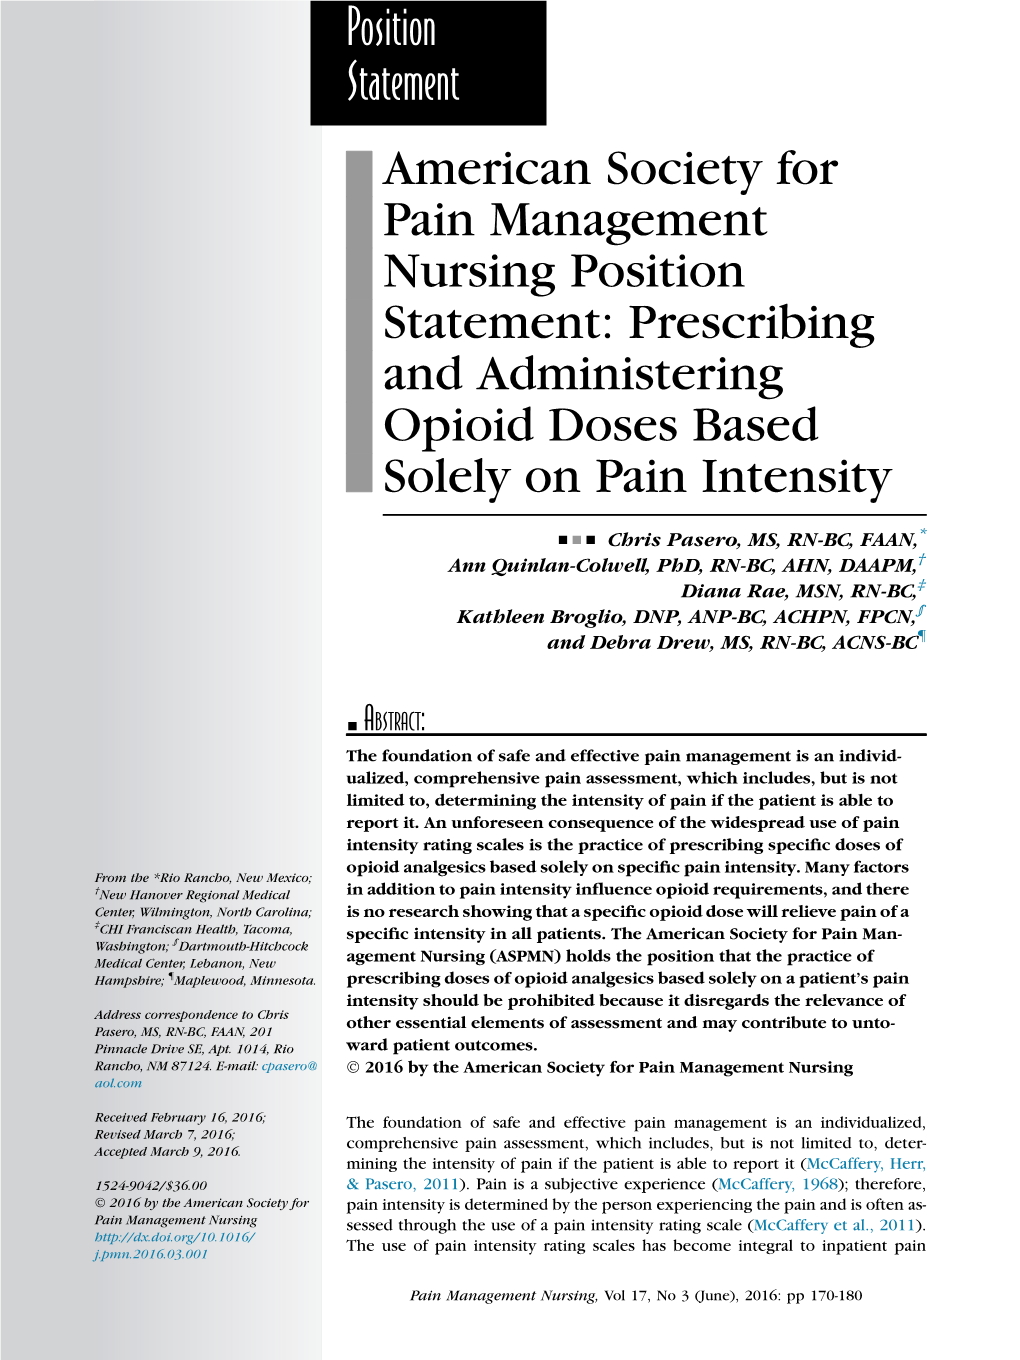 Prescribing and Administering Opioid Doses Based Solely on Pain Intensity